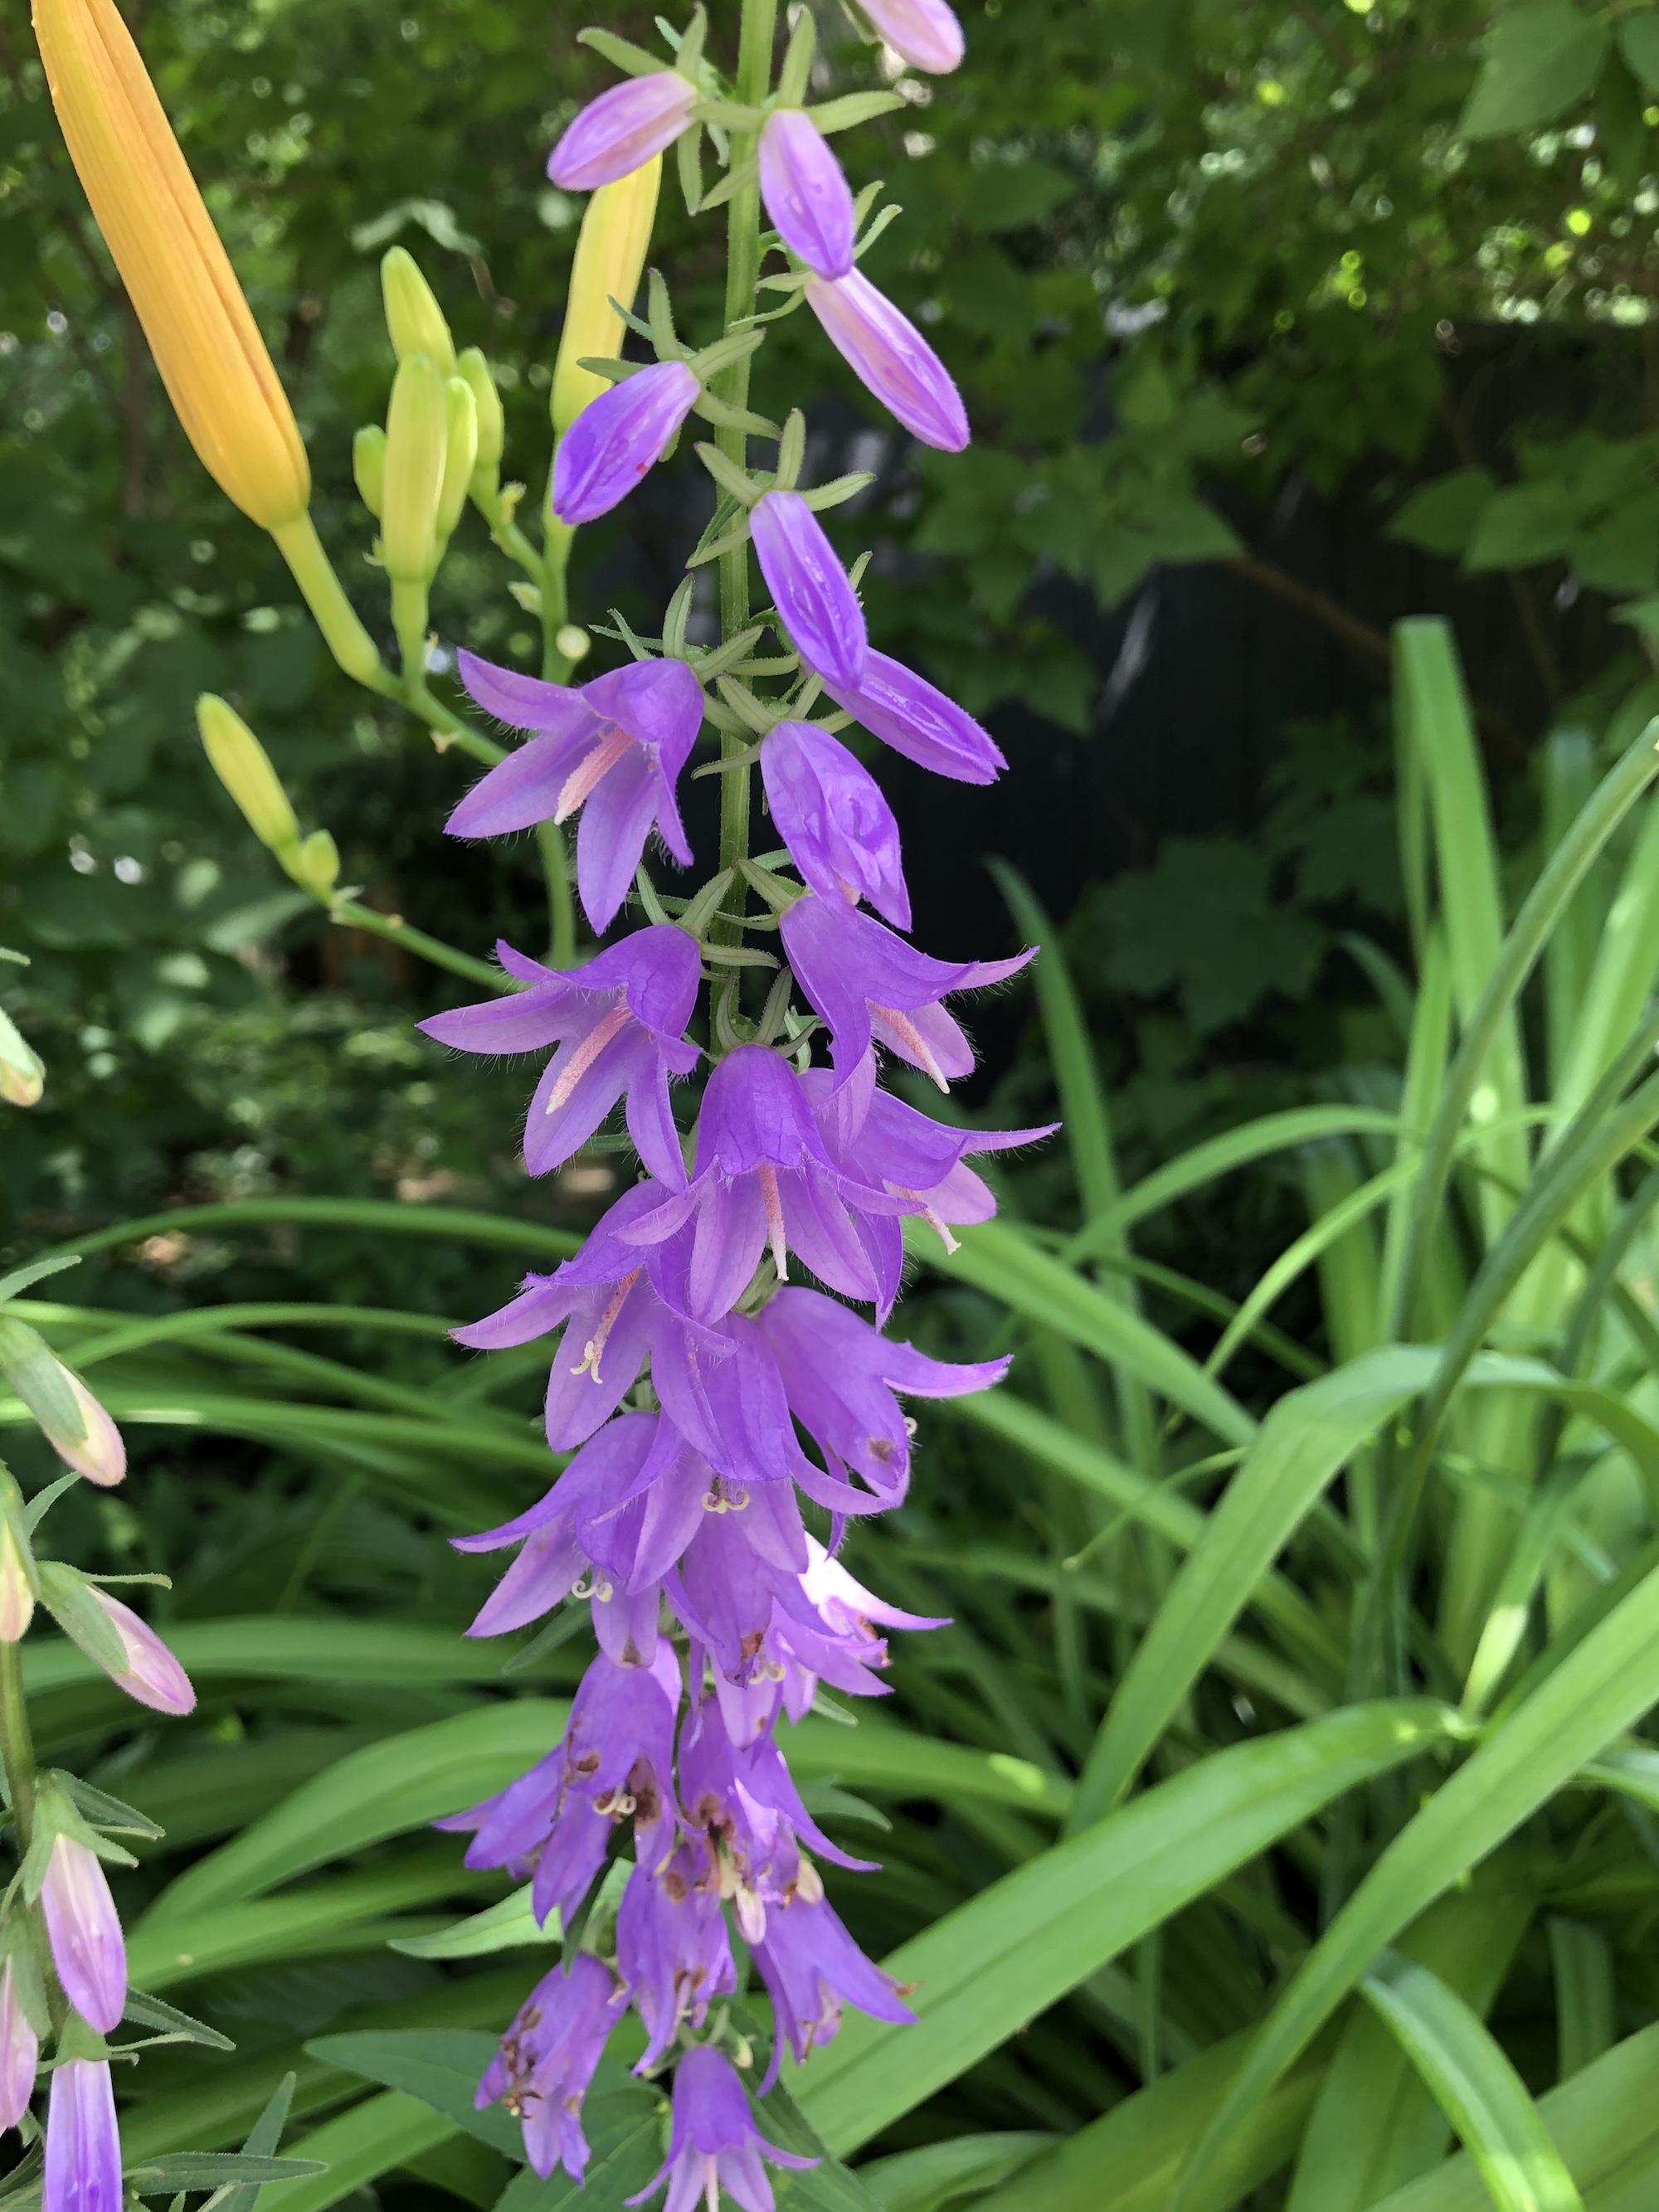 Creeping Bellflower by home in Madison, Wisconsin on June 30, 2020.